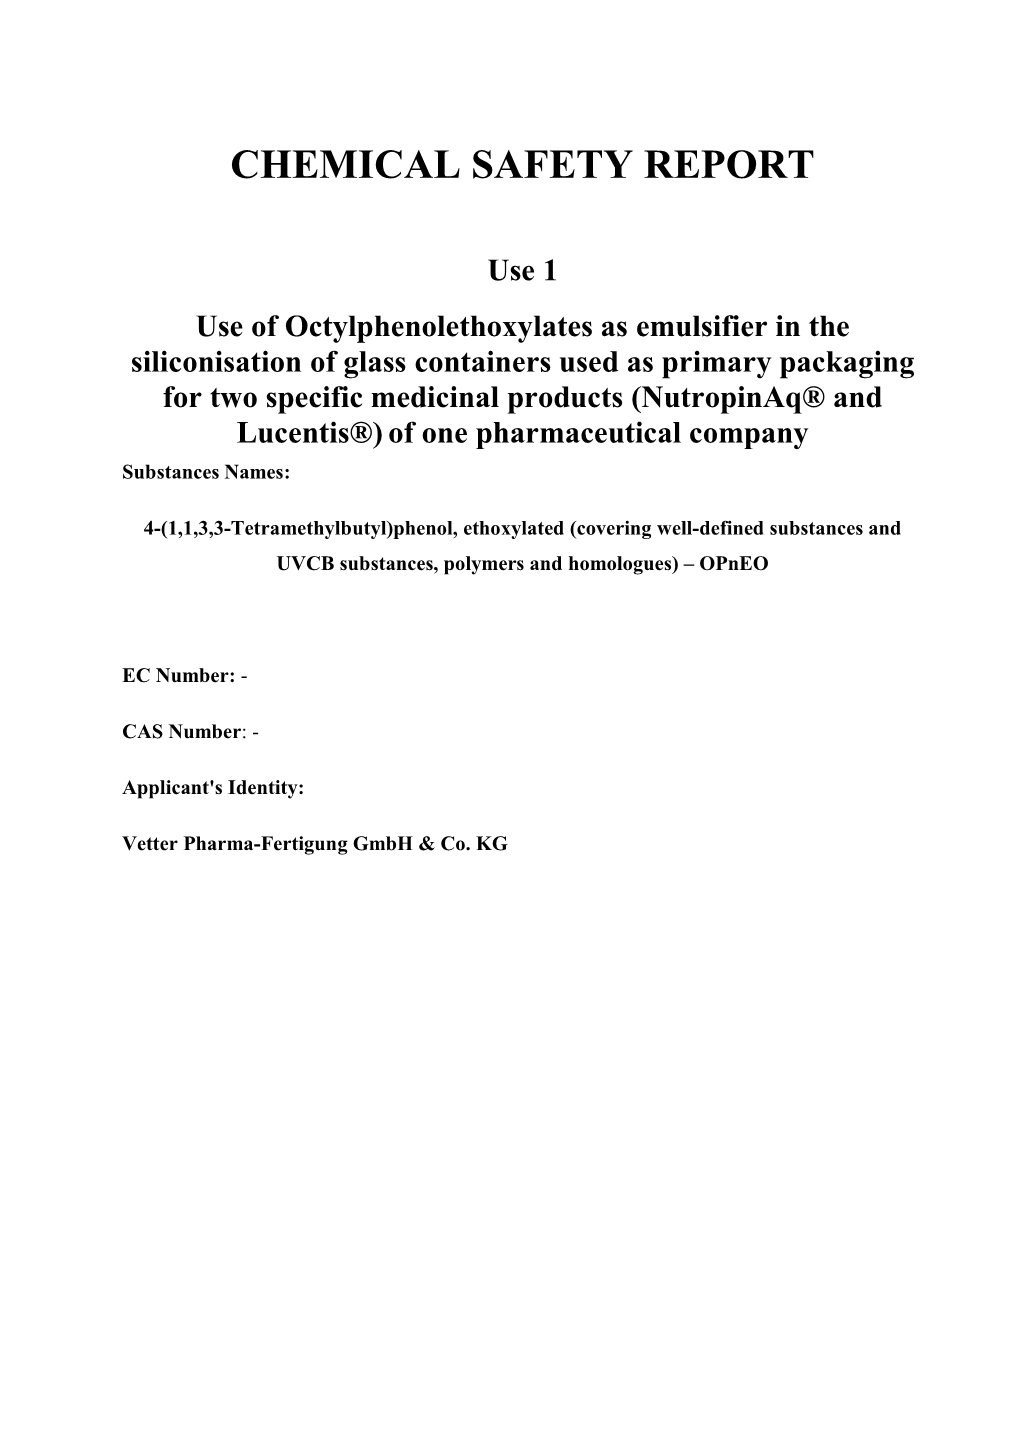 Use of Octylphenolethoxylates As Emulsifier in The